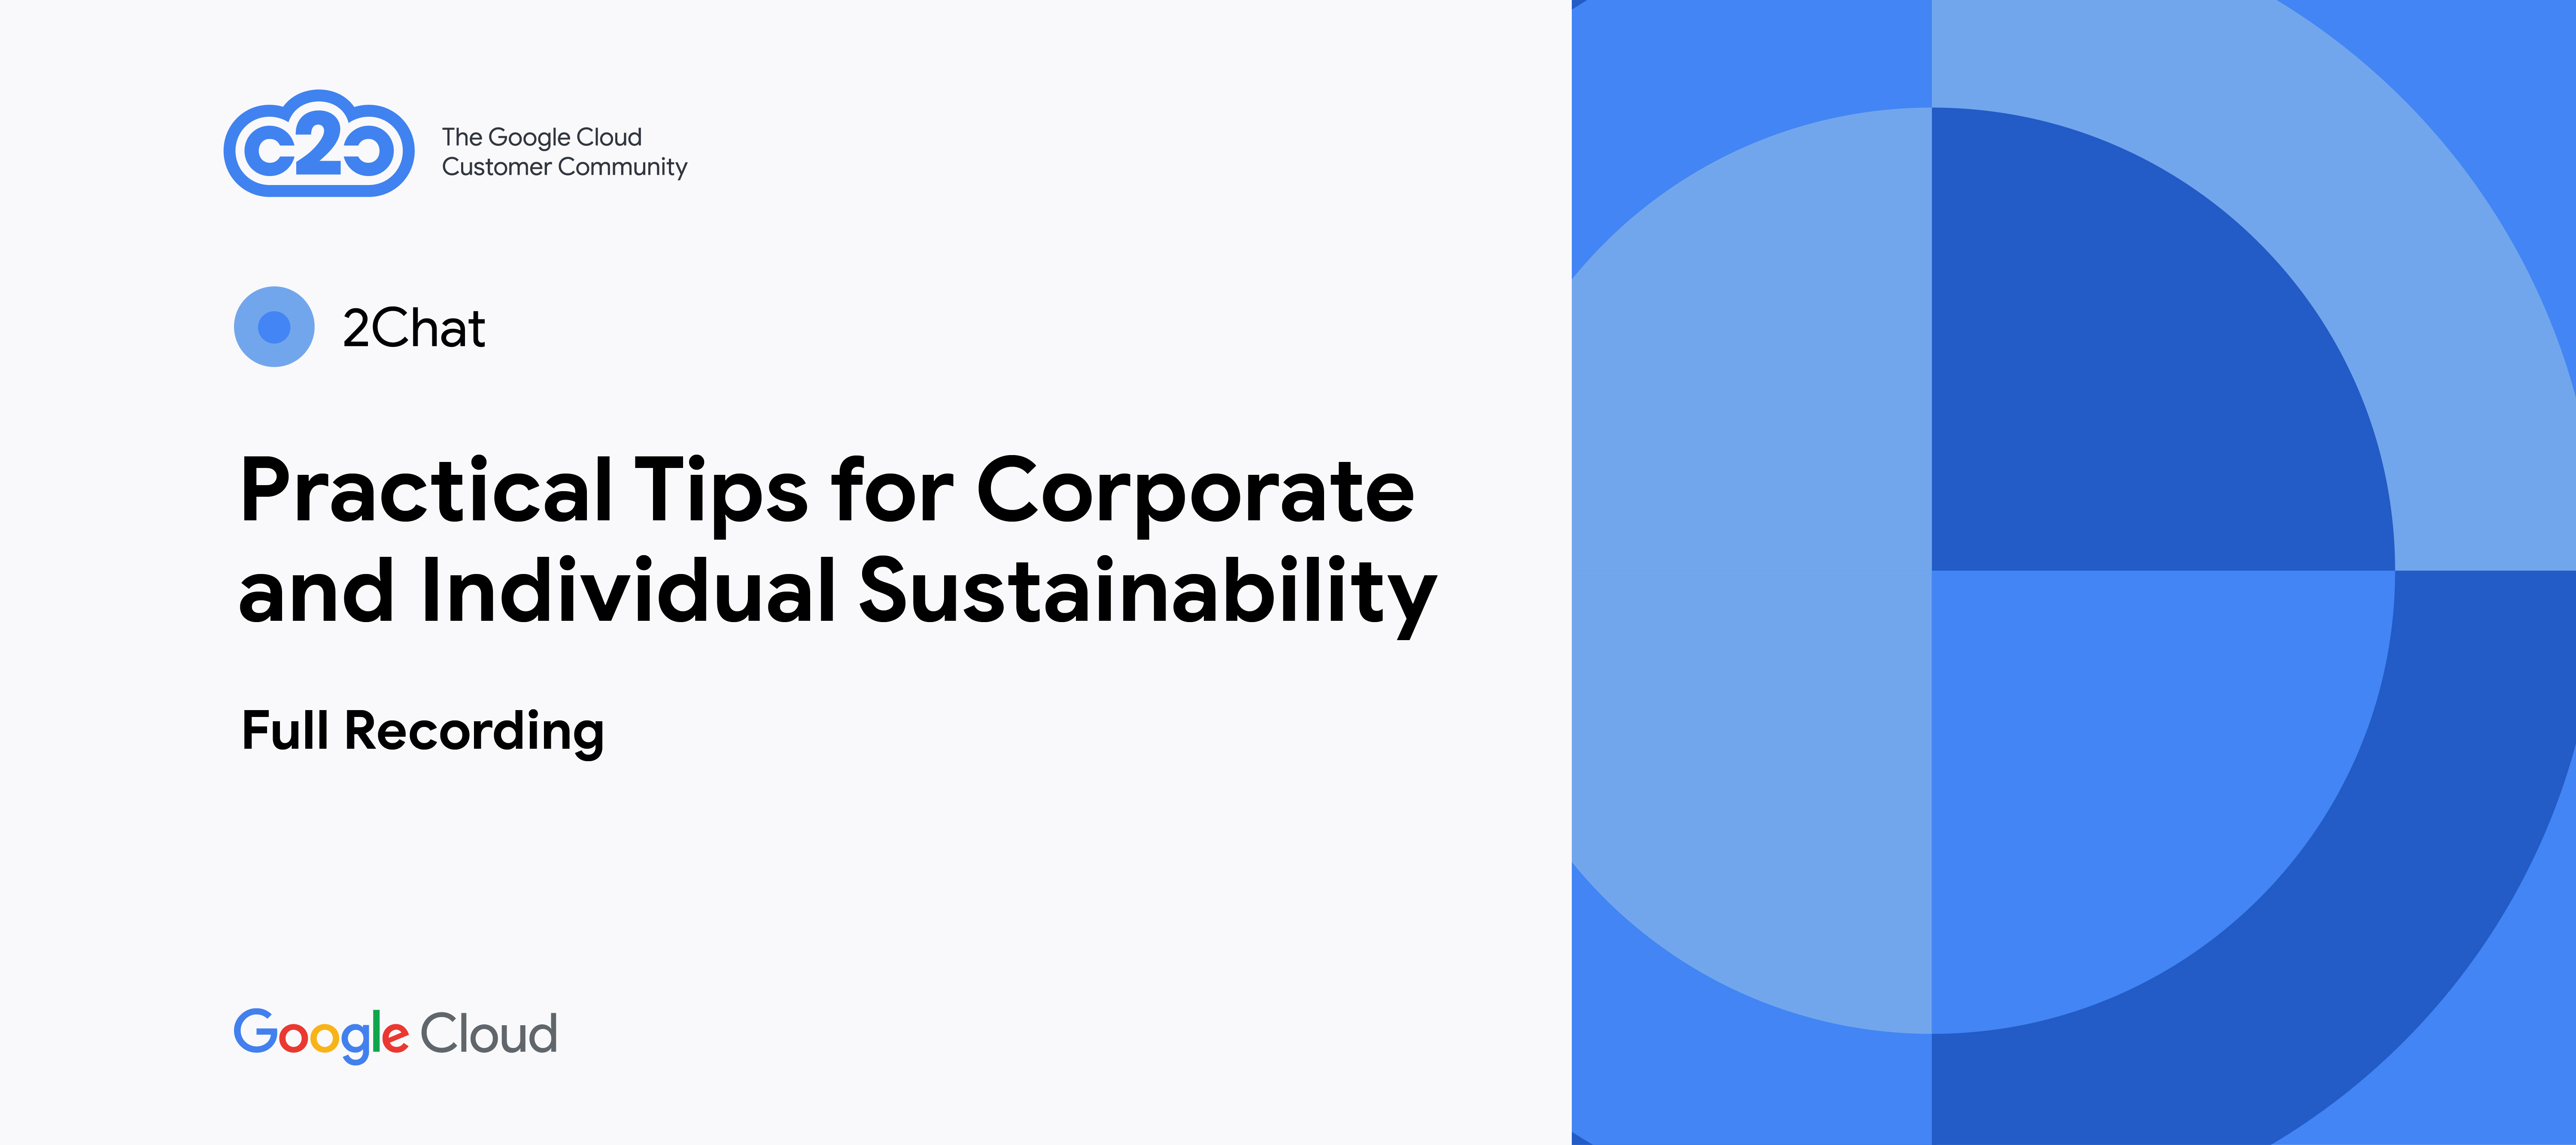 Practical Tips for Corporate and Individual Sustainability (full recording)